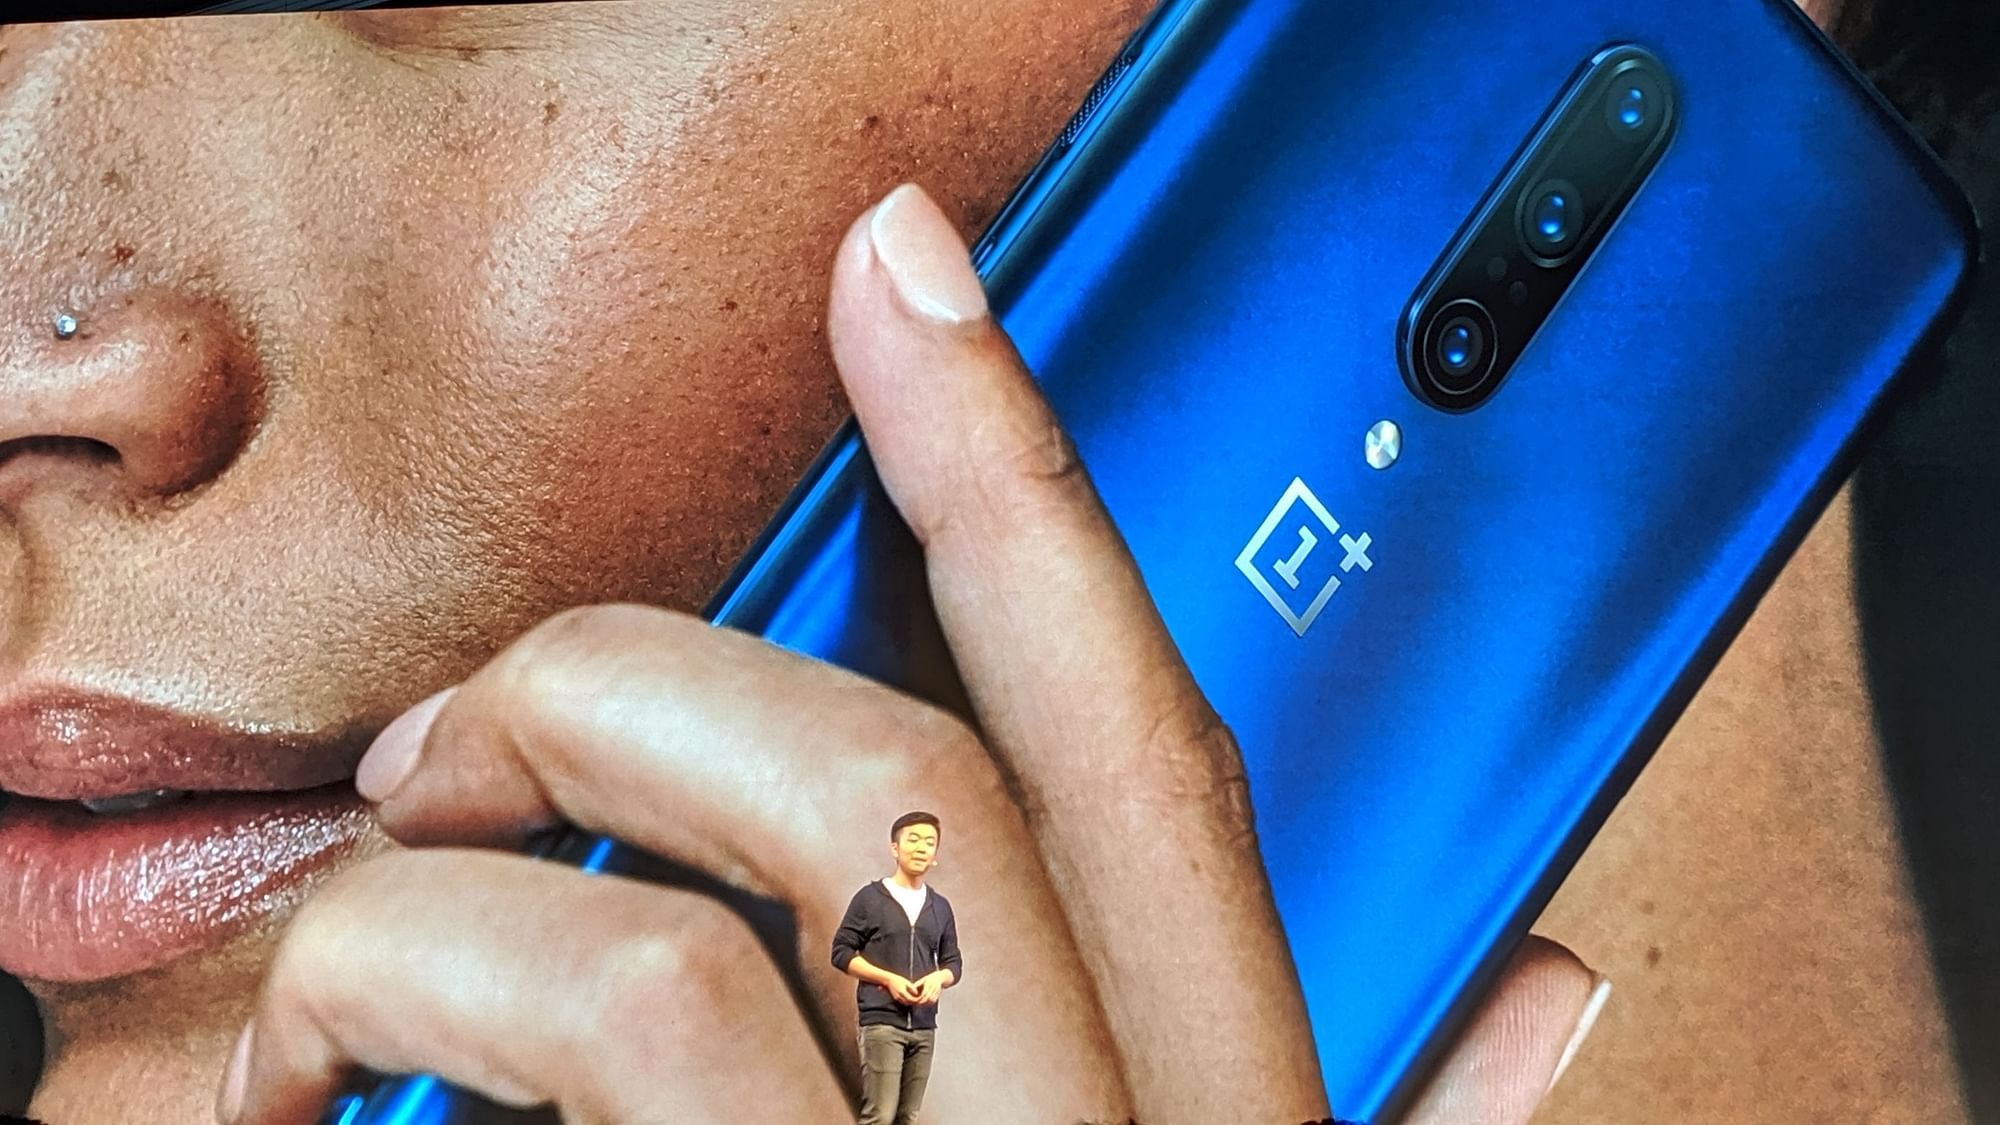 Carl Pei, Co-founder, OnePlus launching the new OnePlus 7 Pro in India.